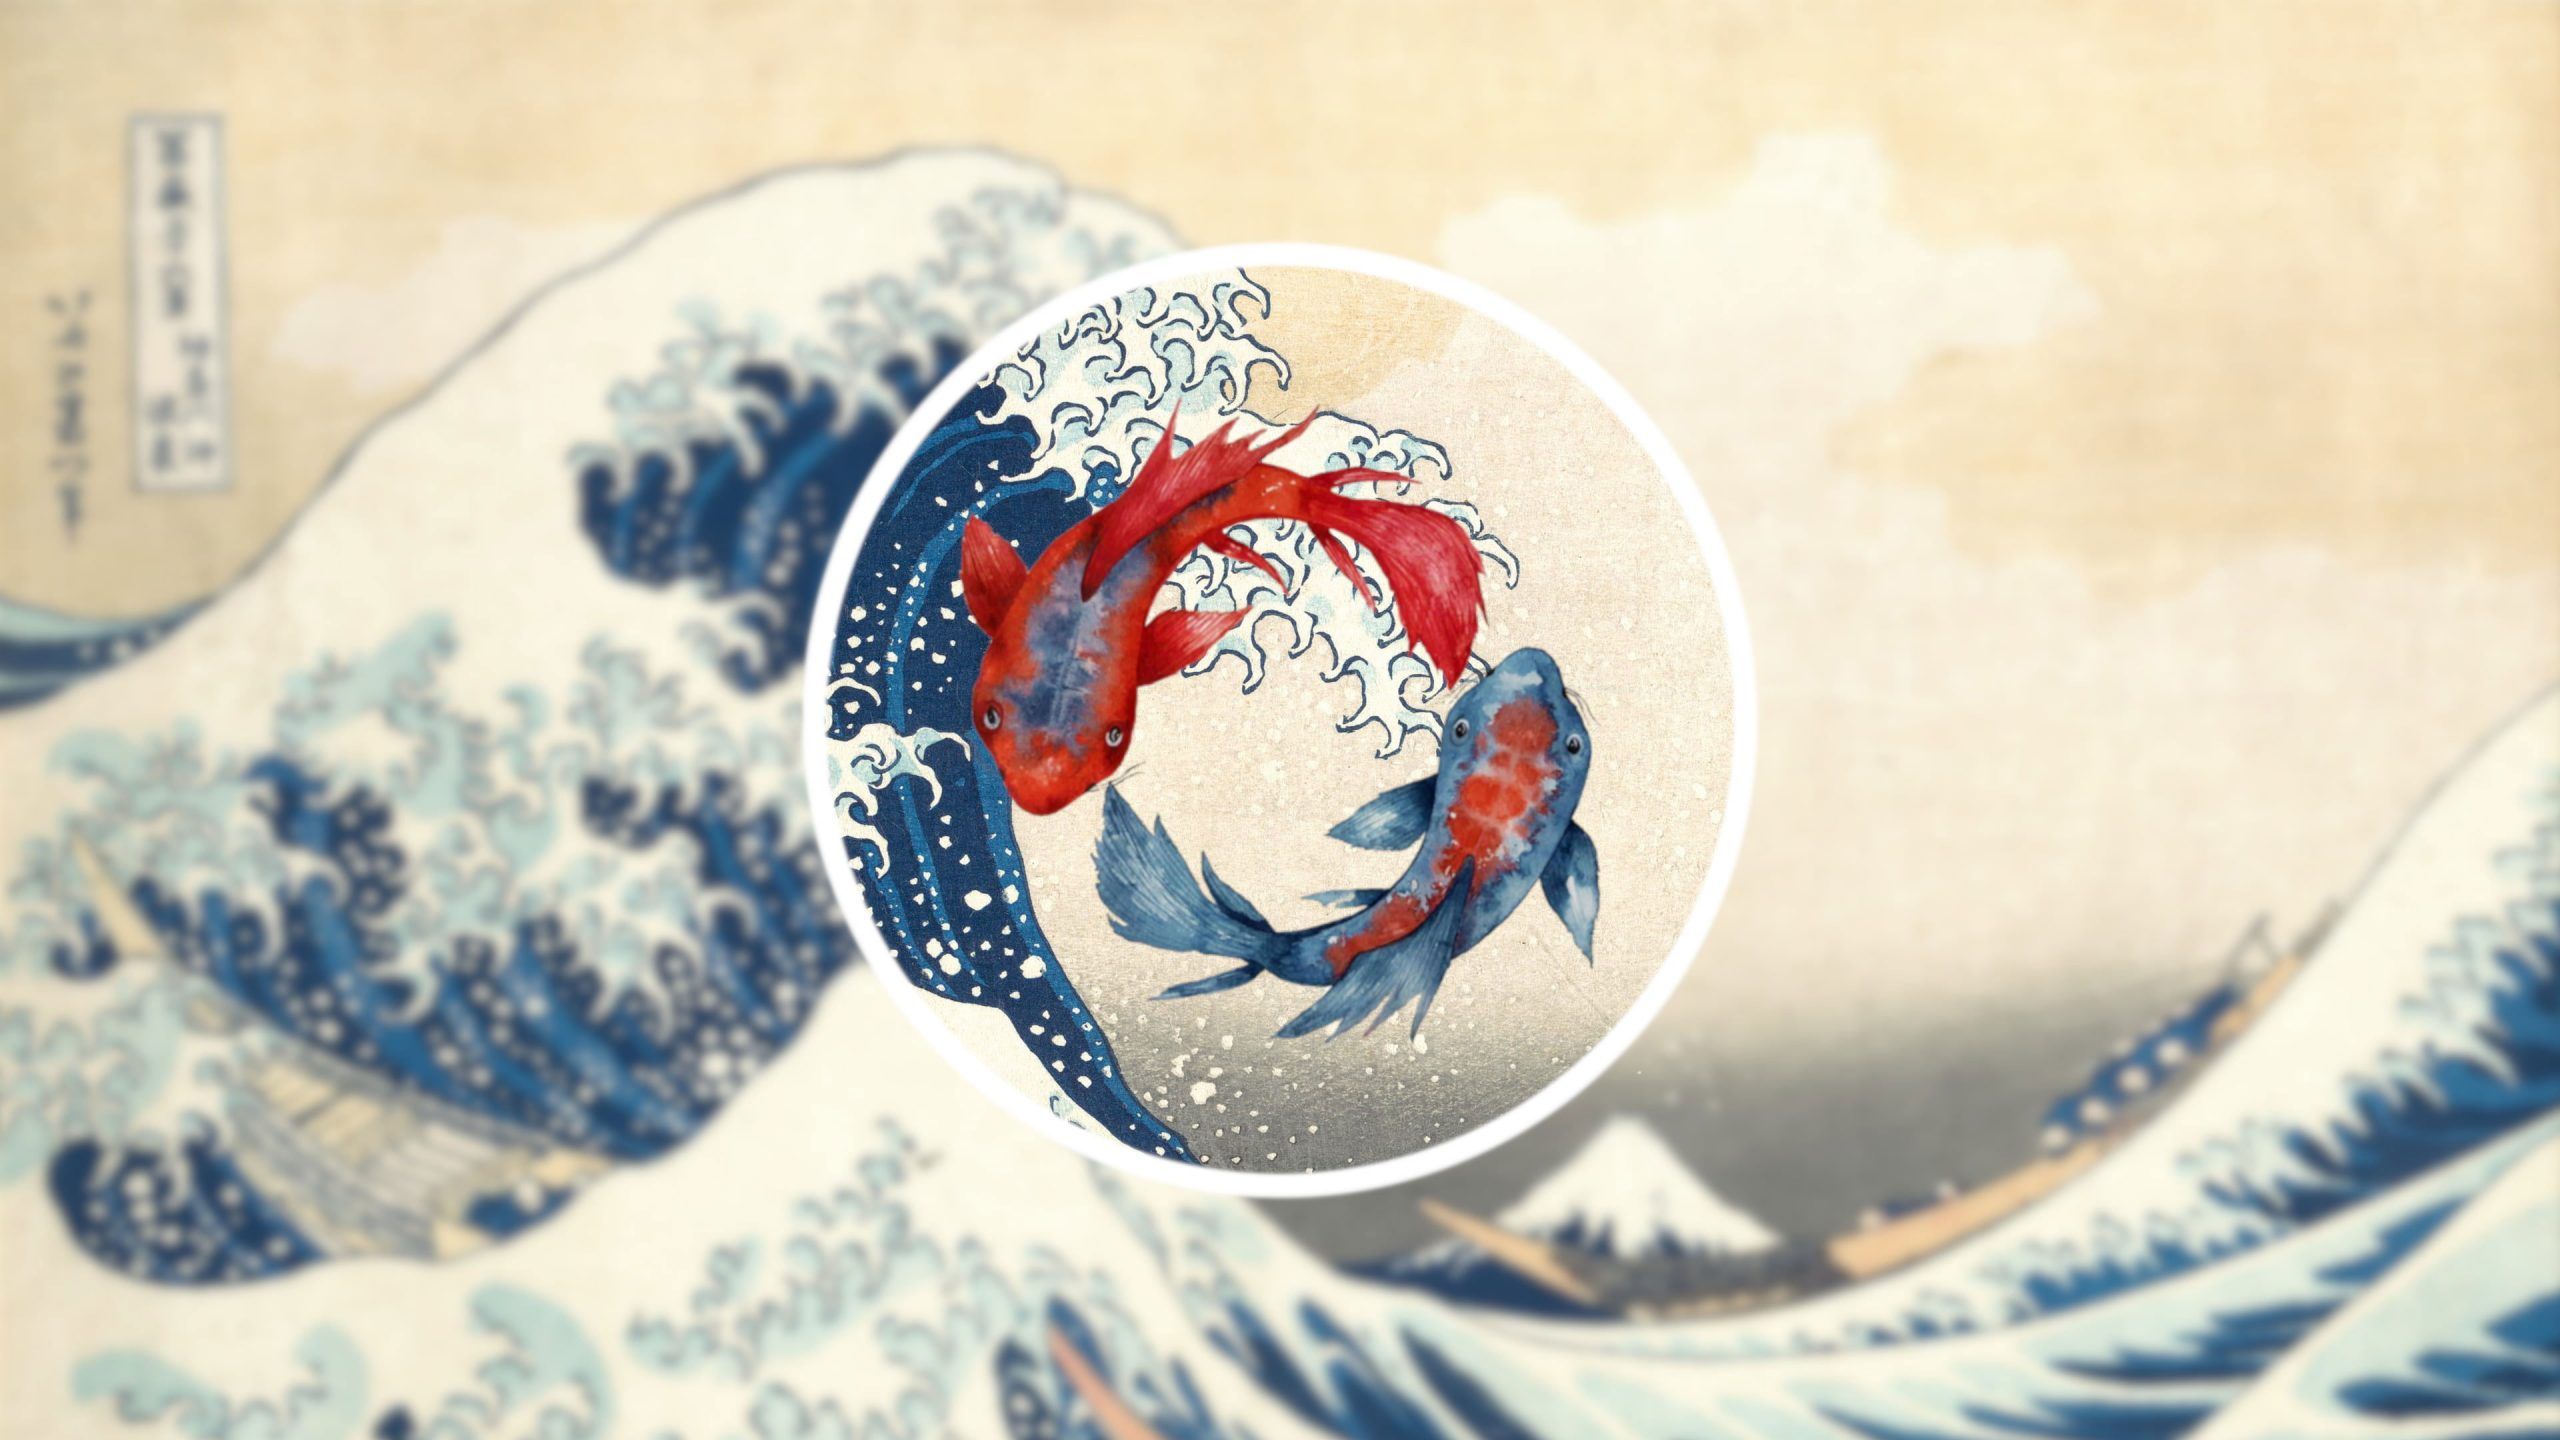 A painting of two fish swimming in the ocean - Koi fish